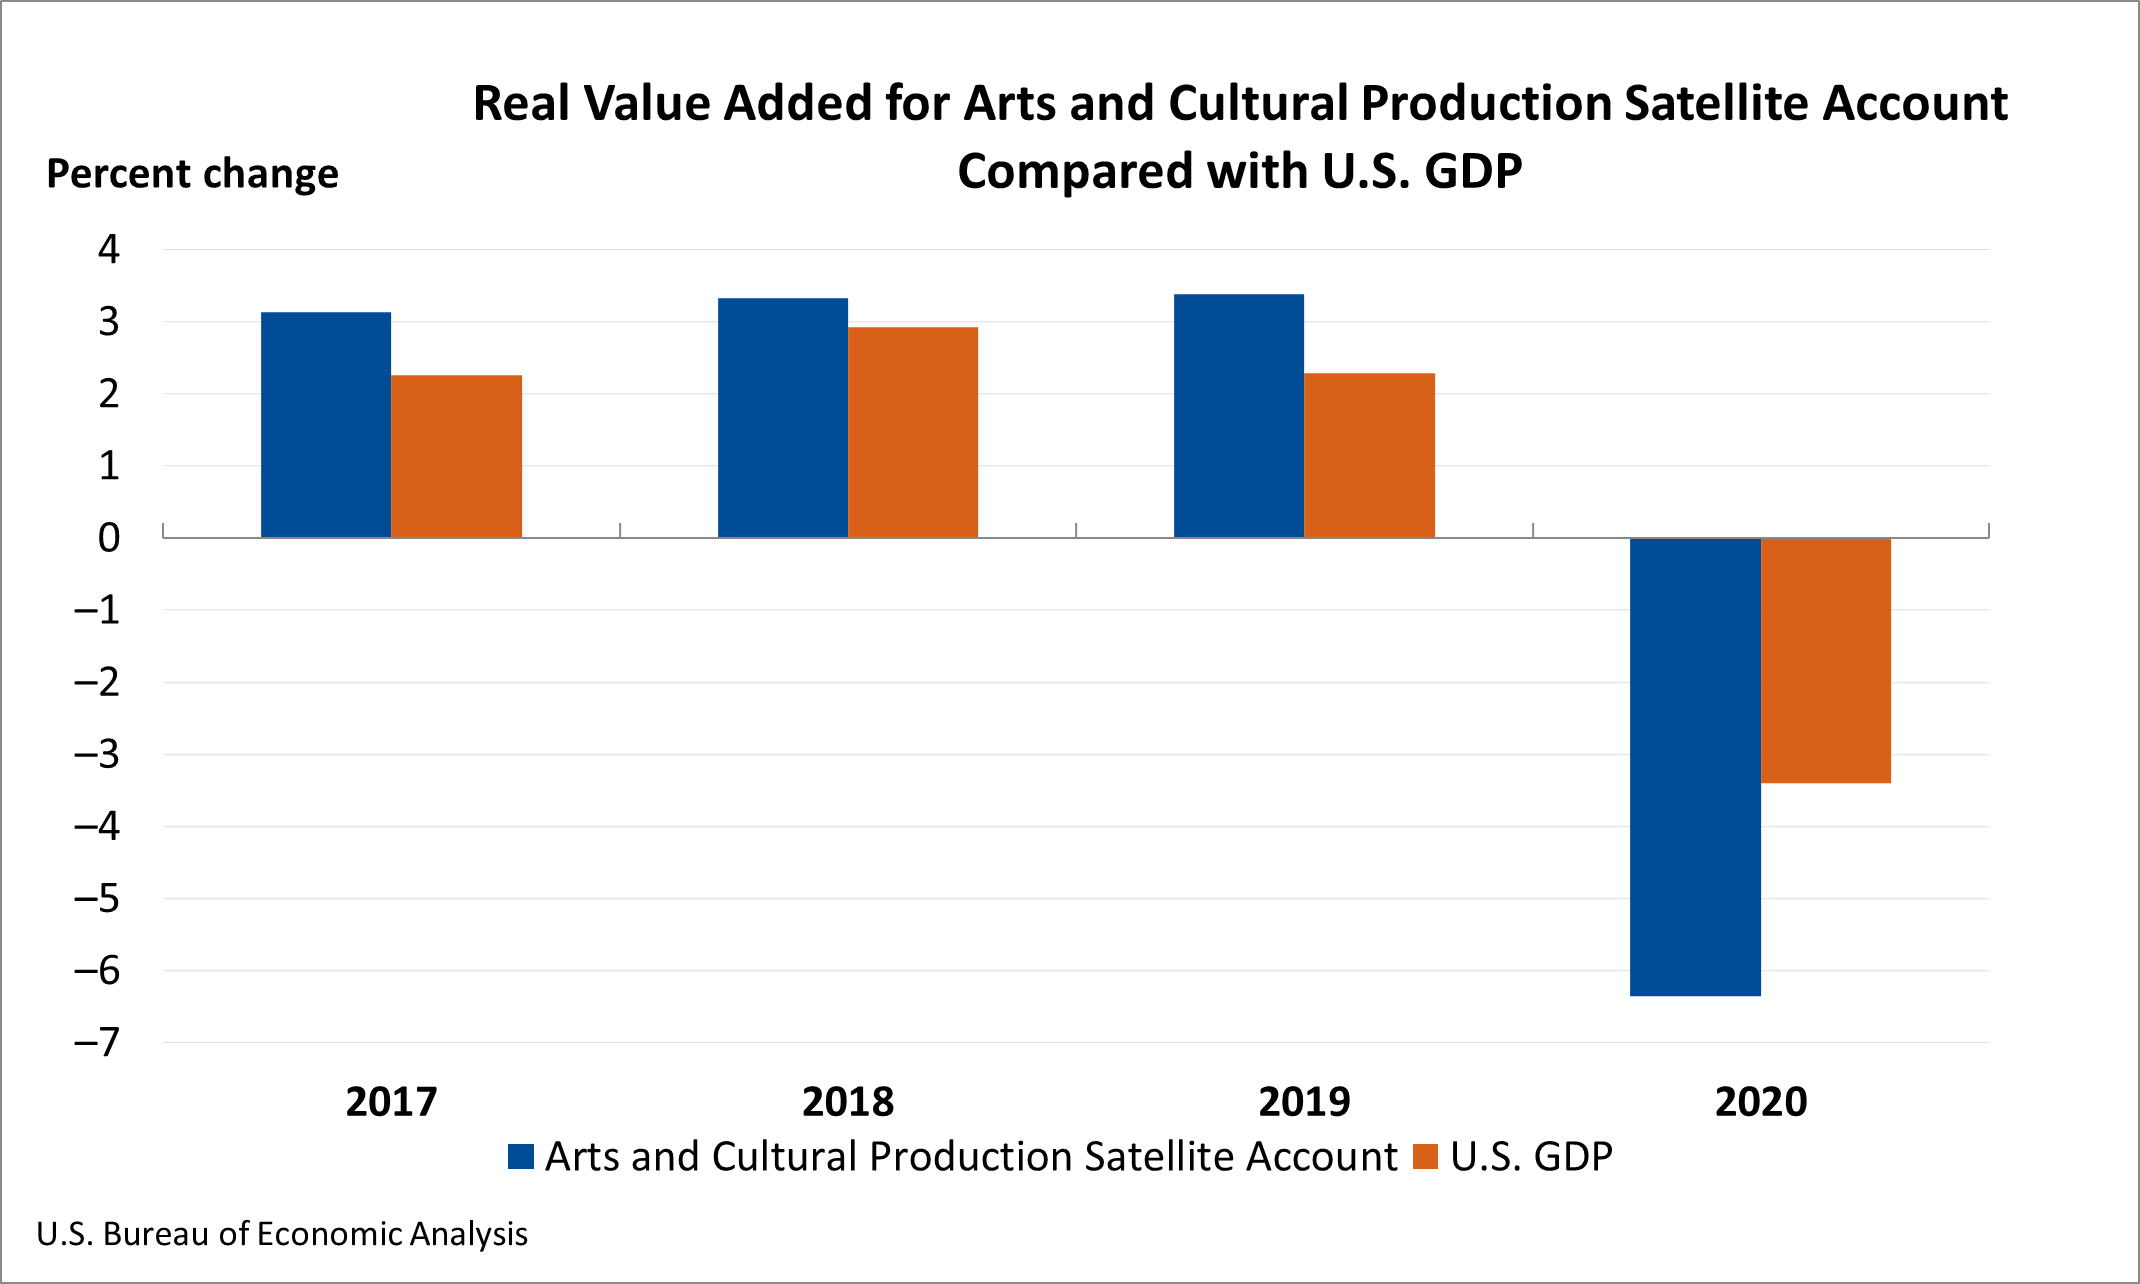 chart: Real Value Added for ACPSA Compared with US GDP